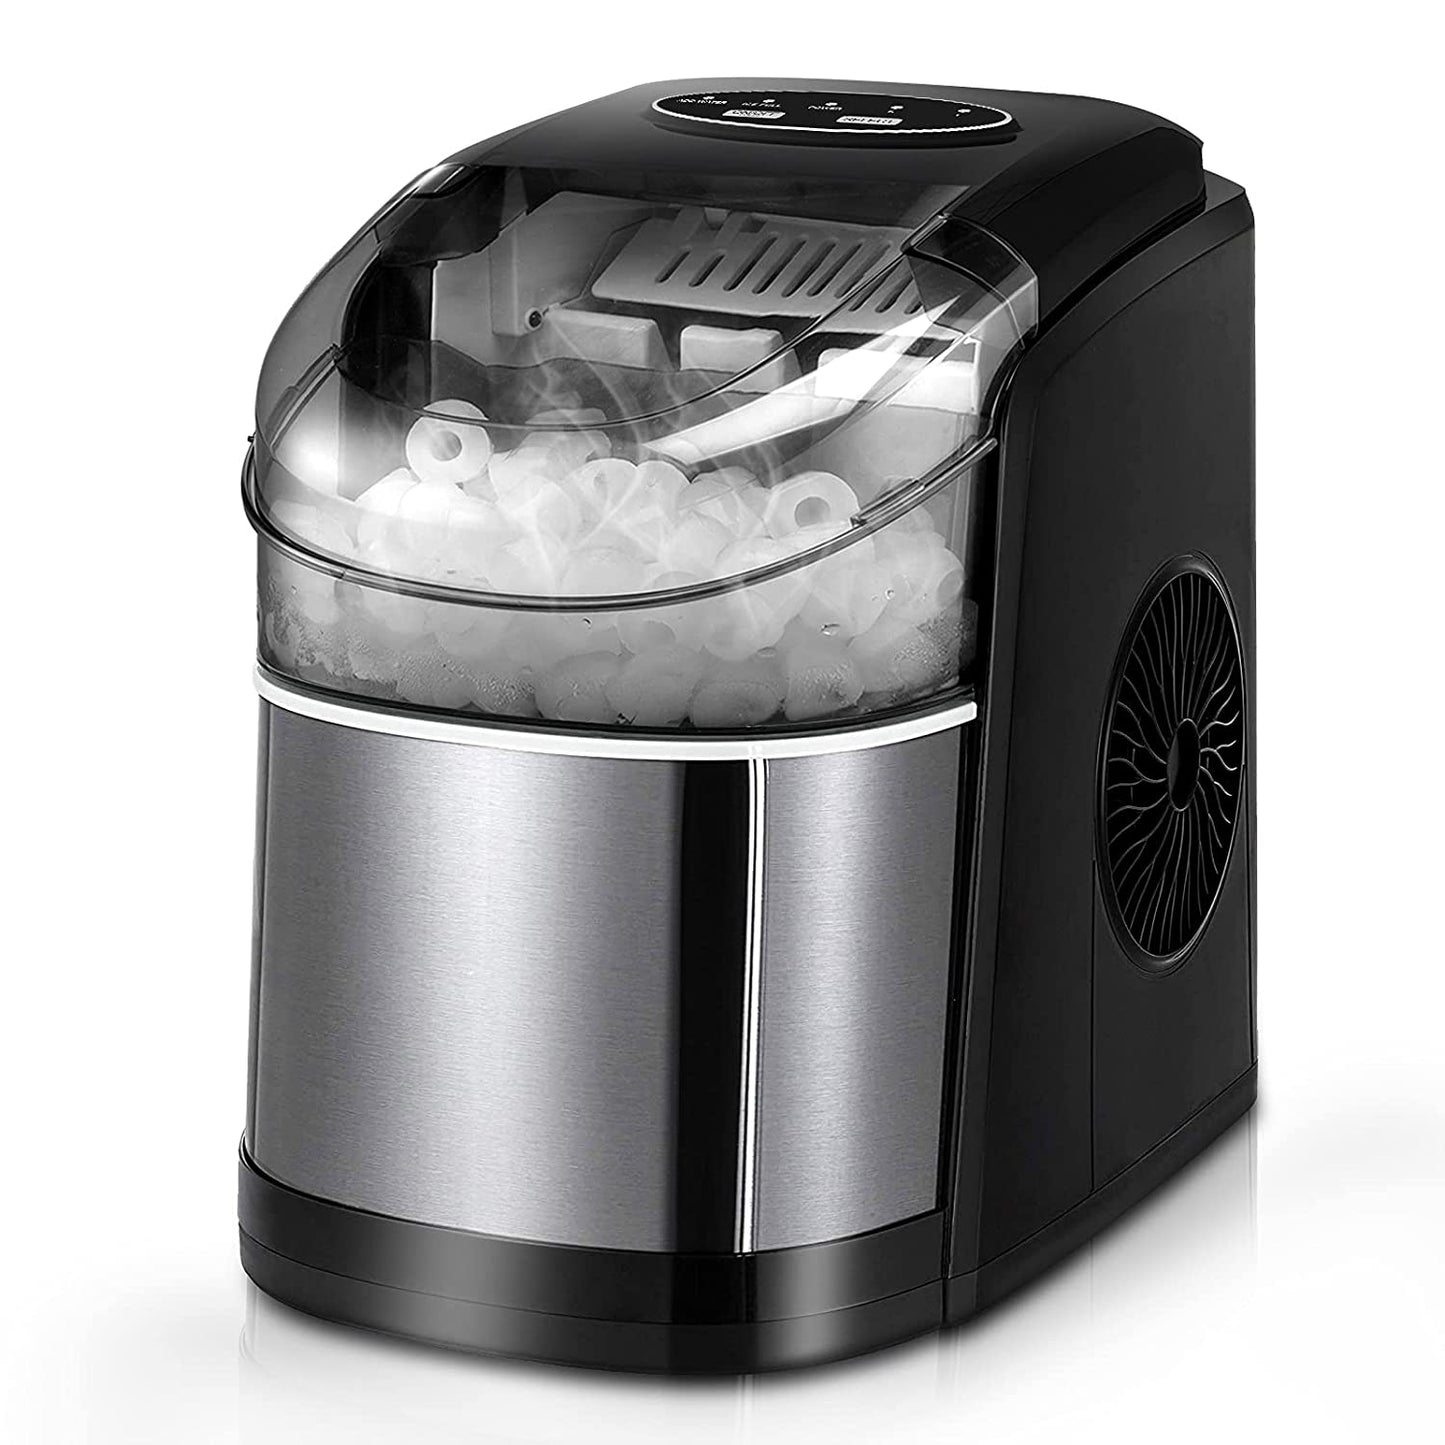 A black and silver ice making machine filled with ice.